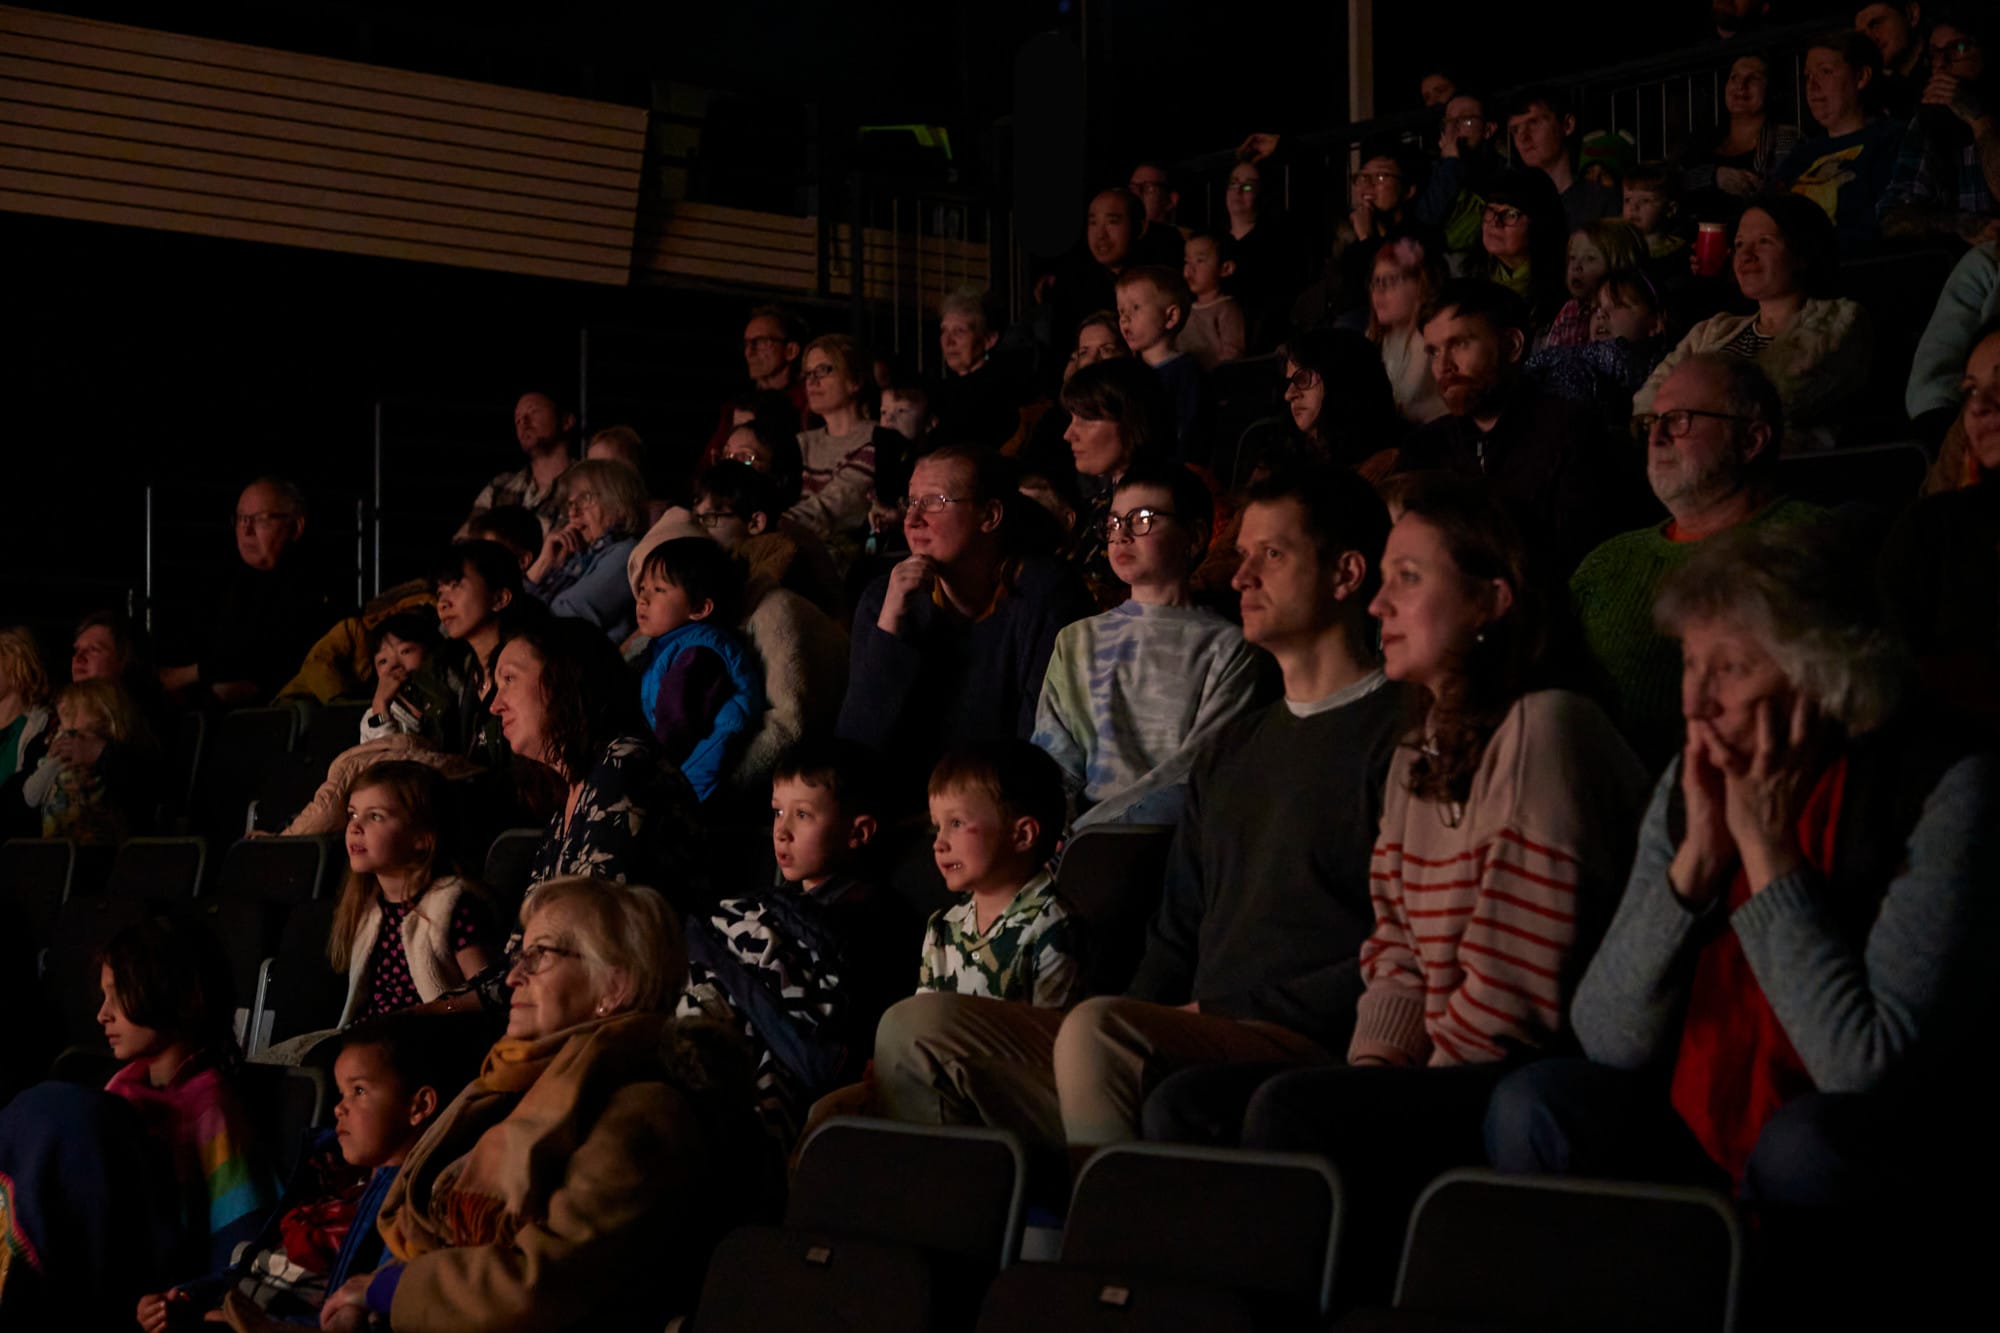 Rows of parents, grandparents and children sitting in Lakeside's dark theatre, their faces illuminated by what is taking place on stage.